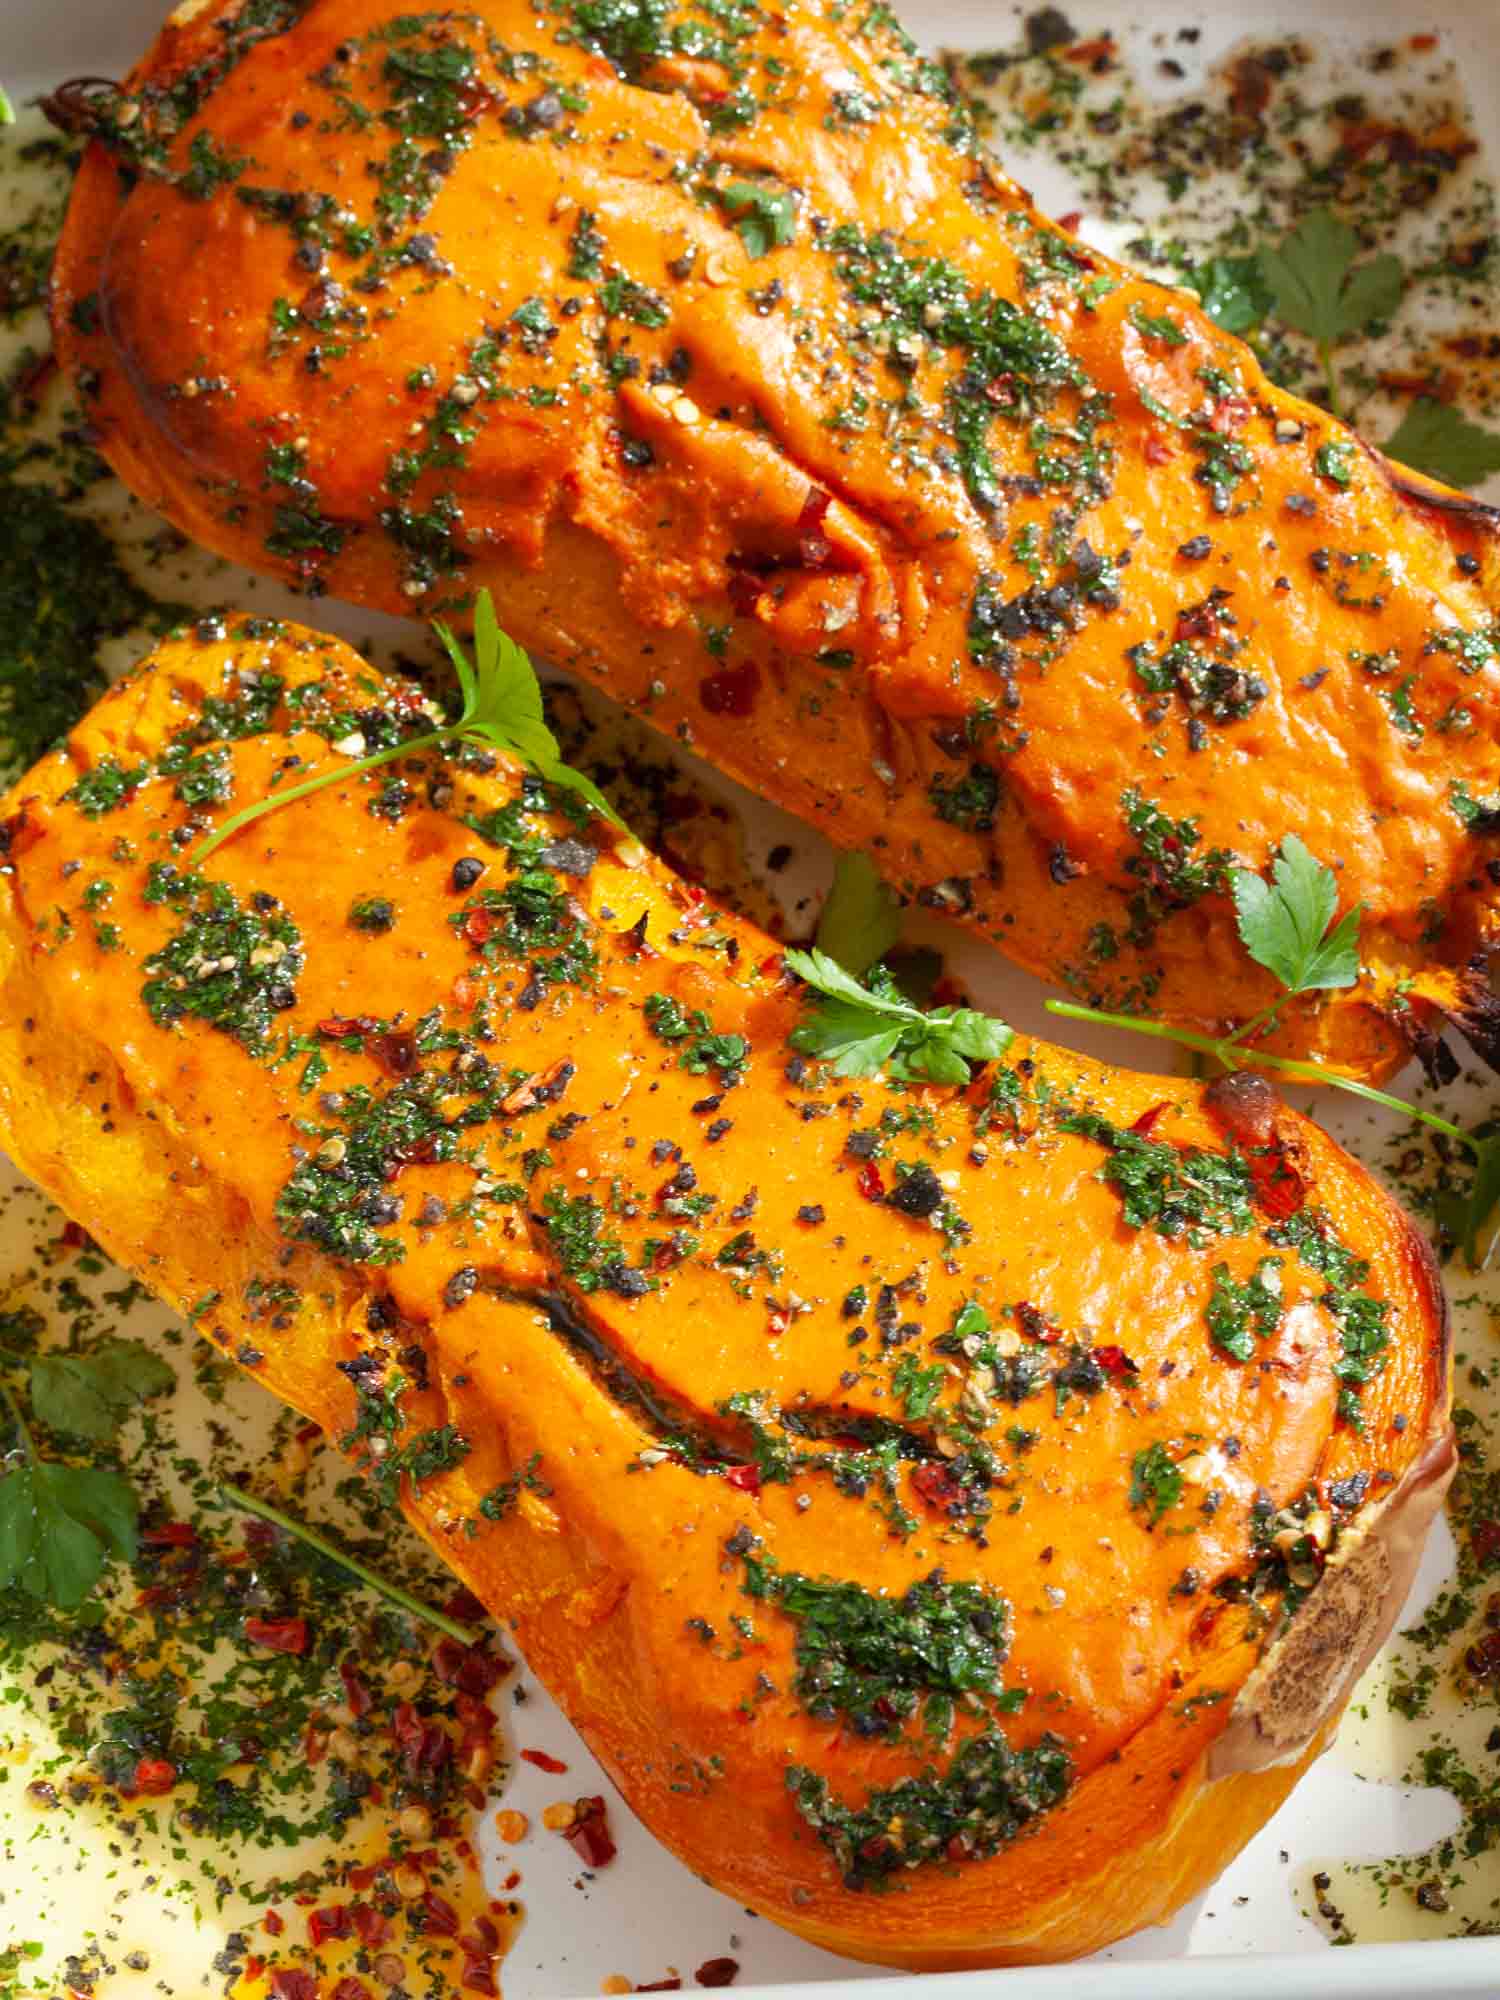 Butternut squash with feta and tomato mousse